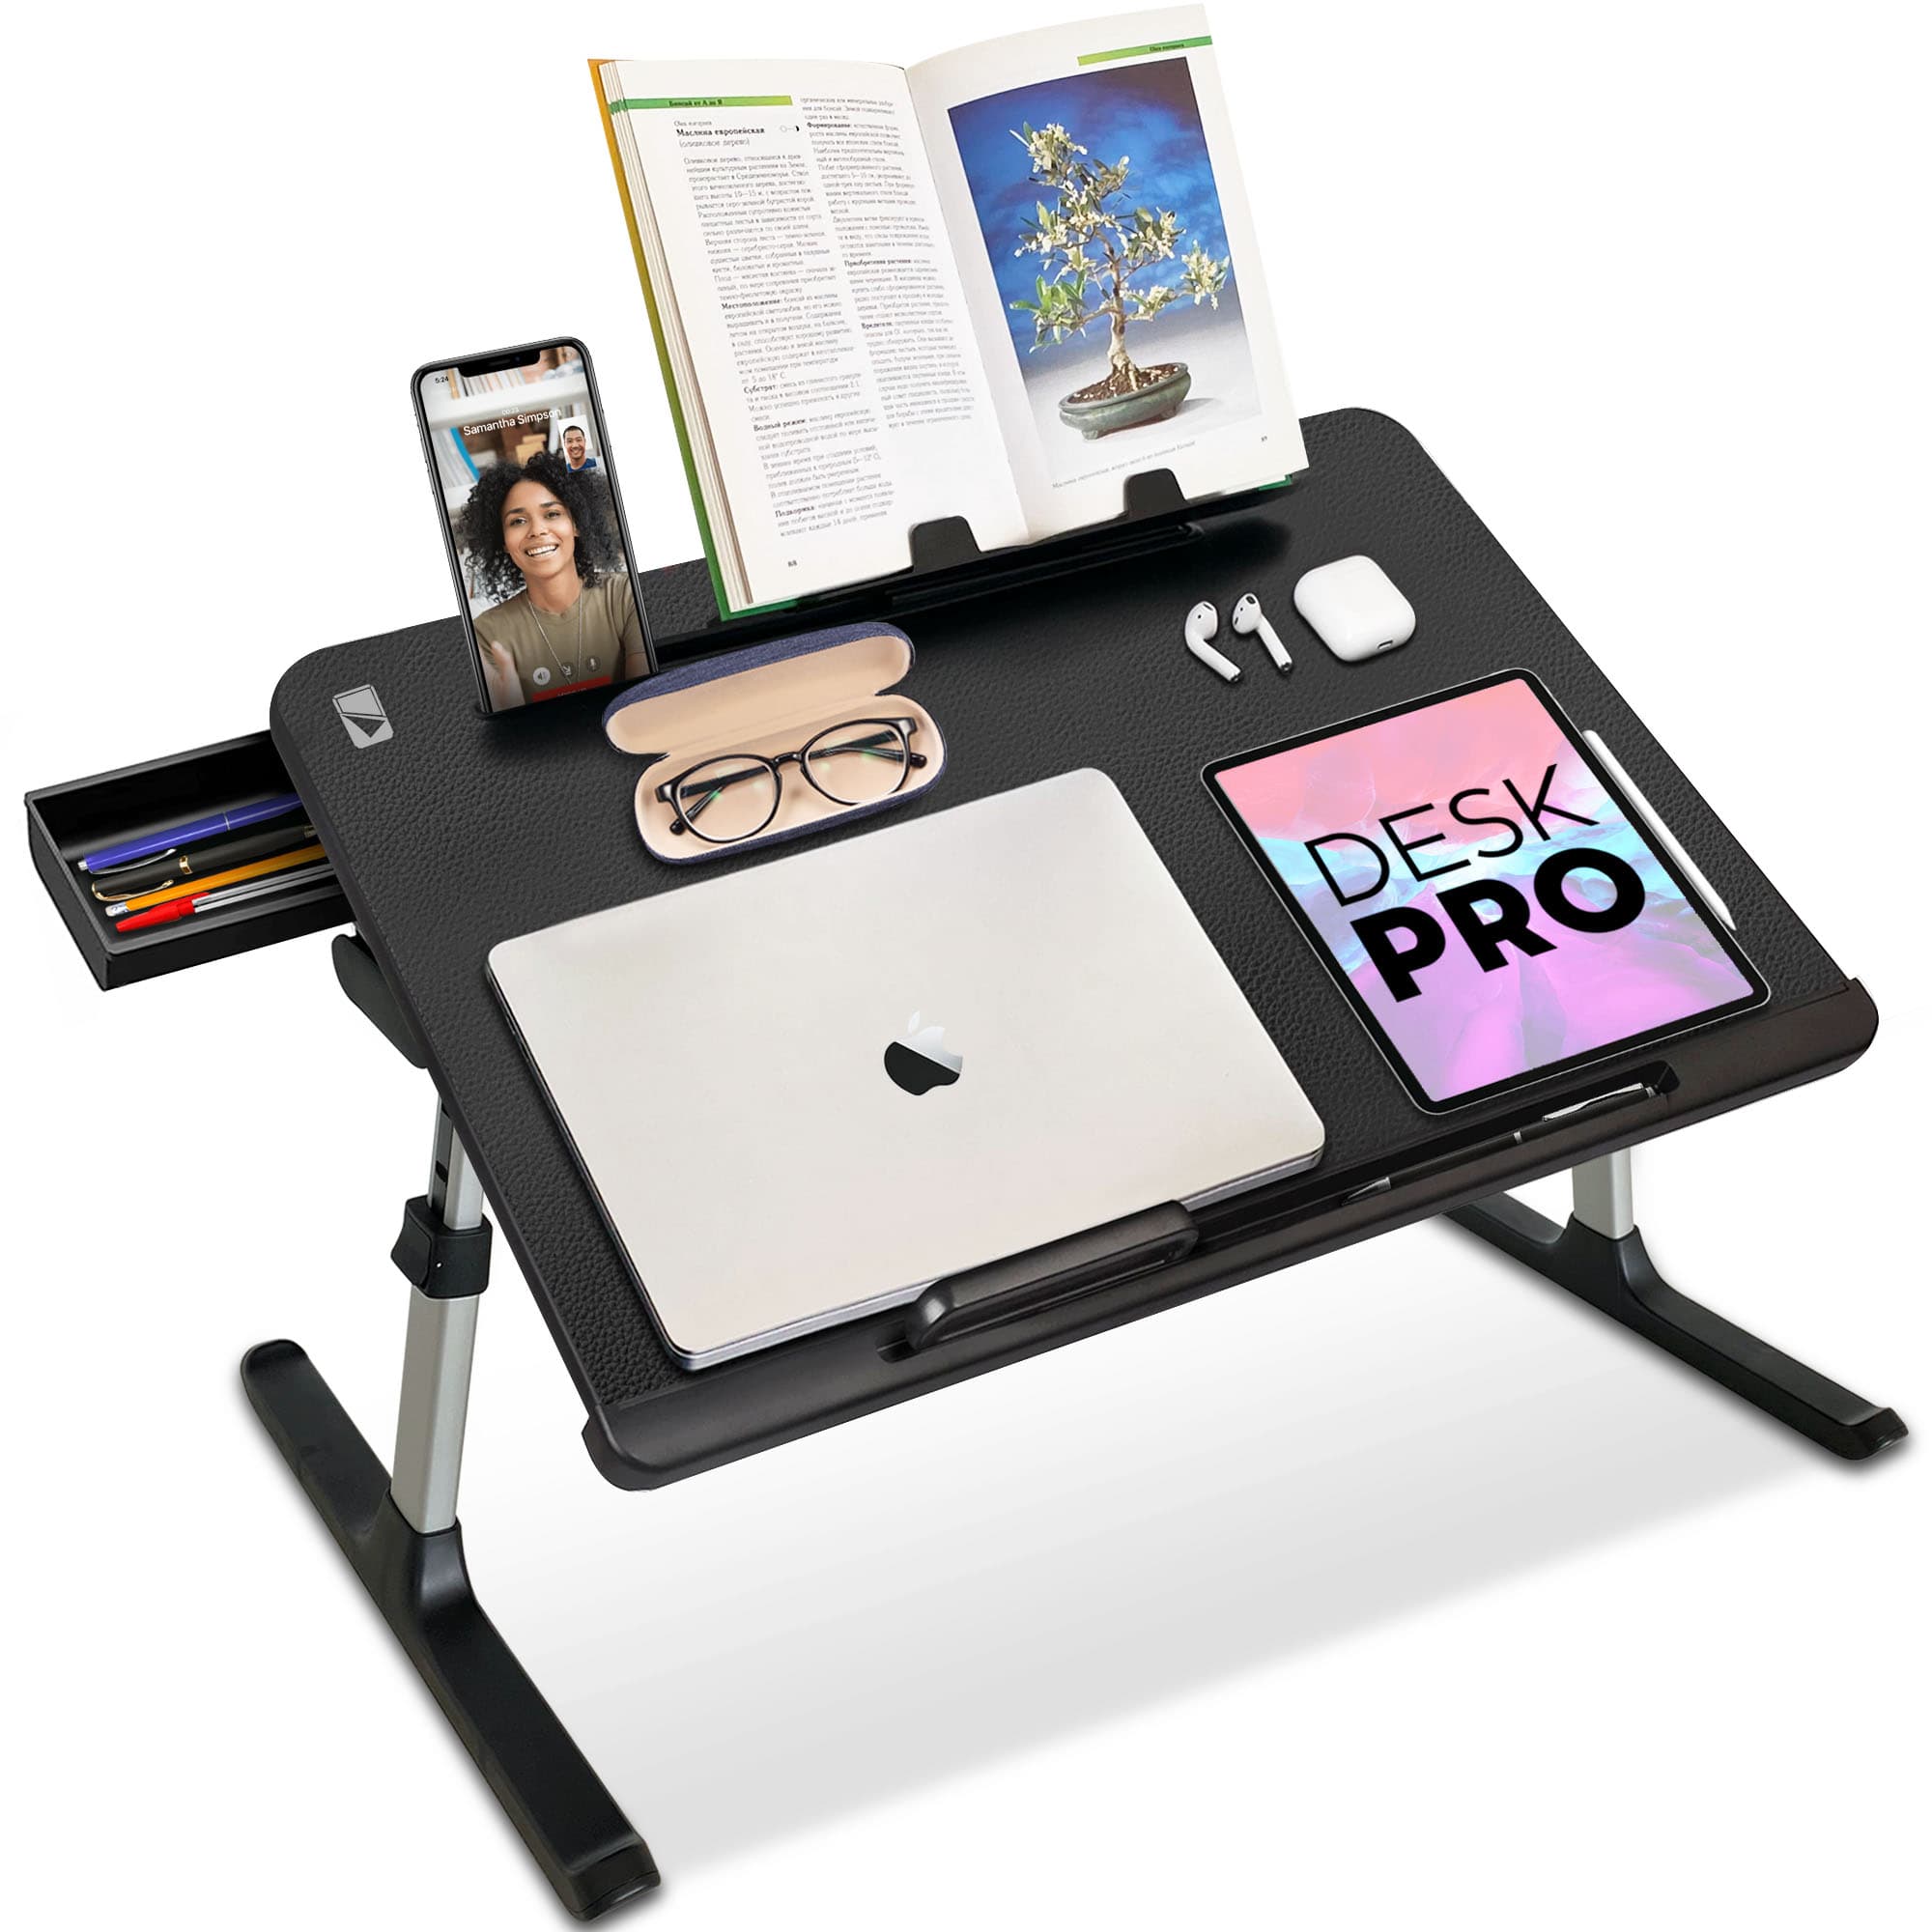  Lap Desk Laptop Bed Table: Fits up to 15.6 inch Laptop Computer  lapdesk with Soft Pillow and Storage Bag - Padded Lap Work Tray and Gaming  Desk on Bed - Wood